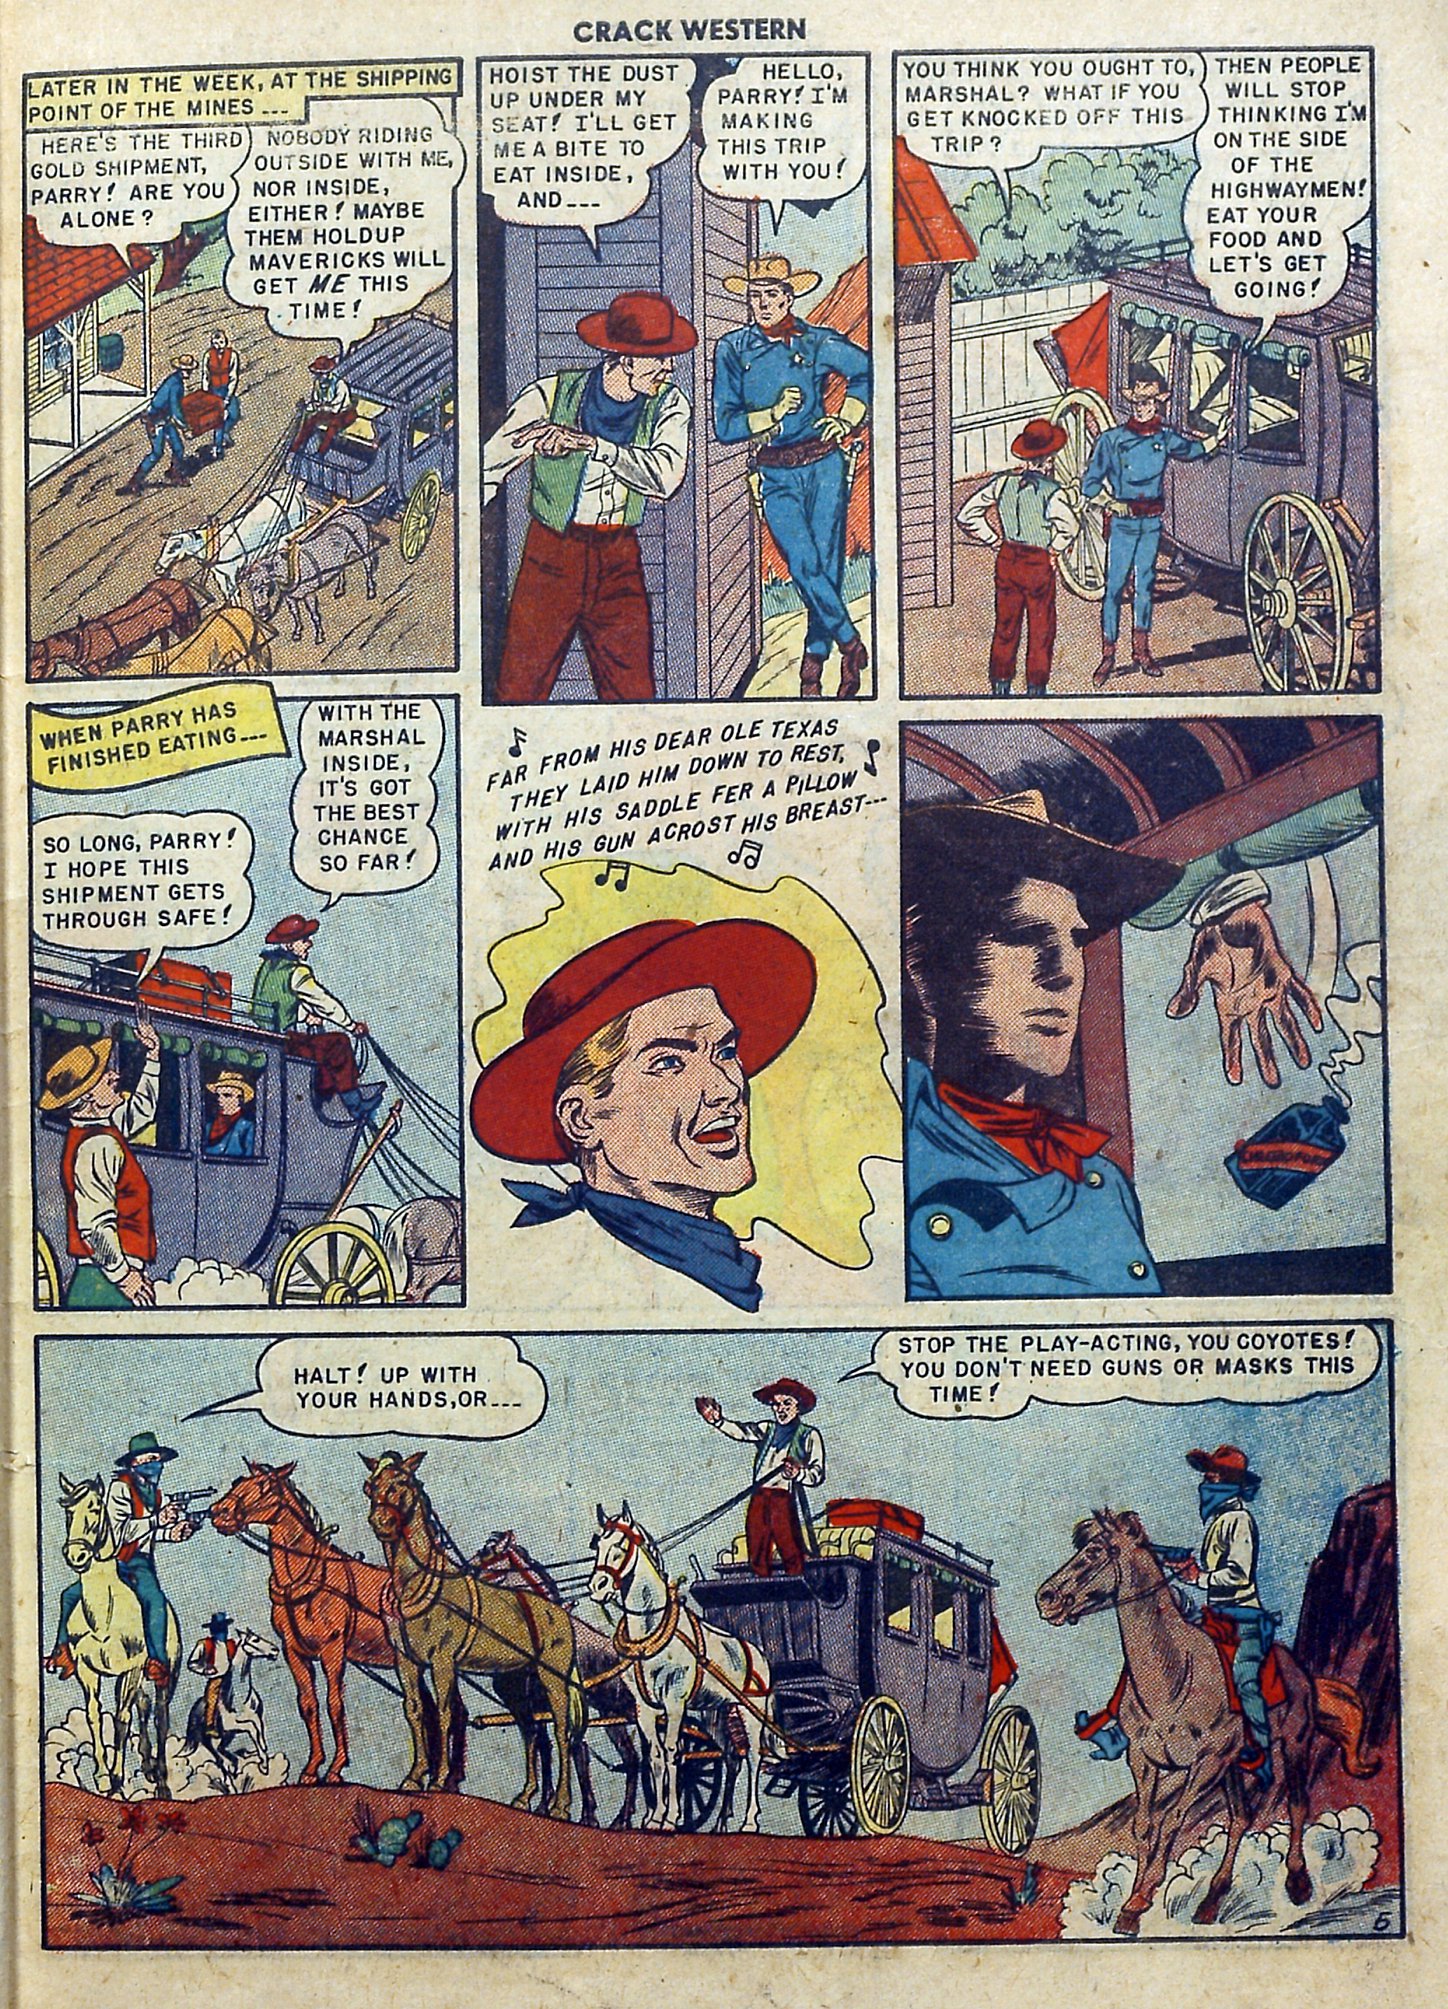 Read online Crack Western comic -  Issue #66 - 31